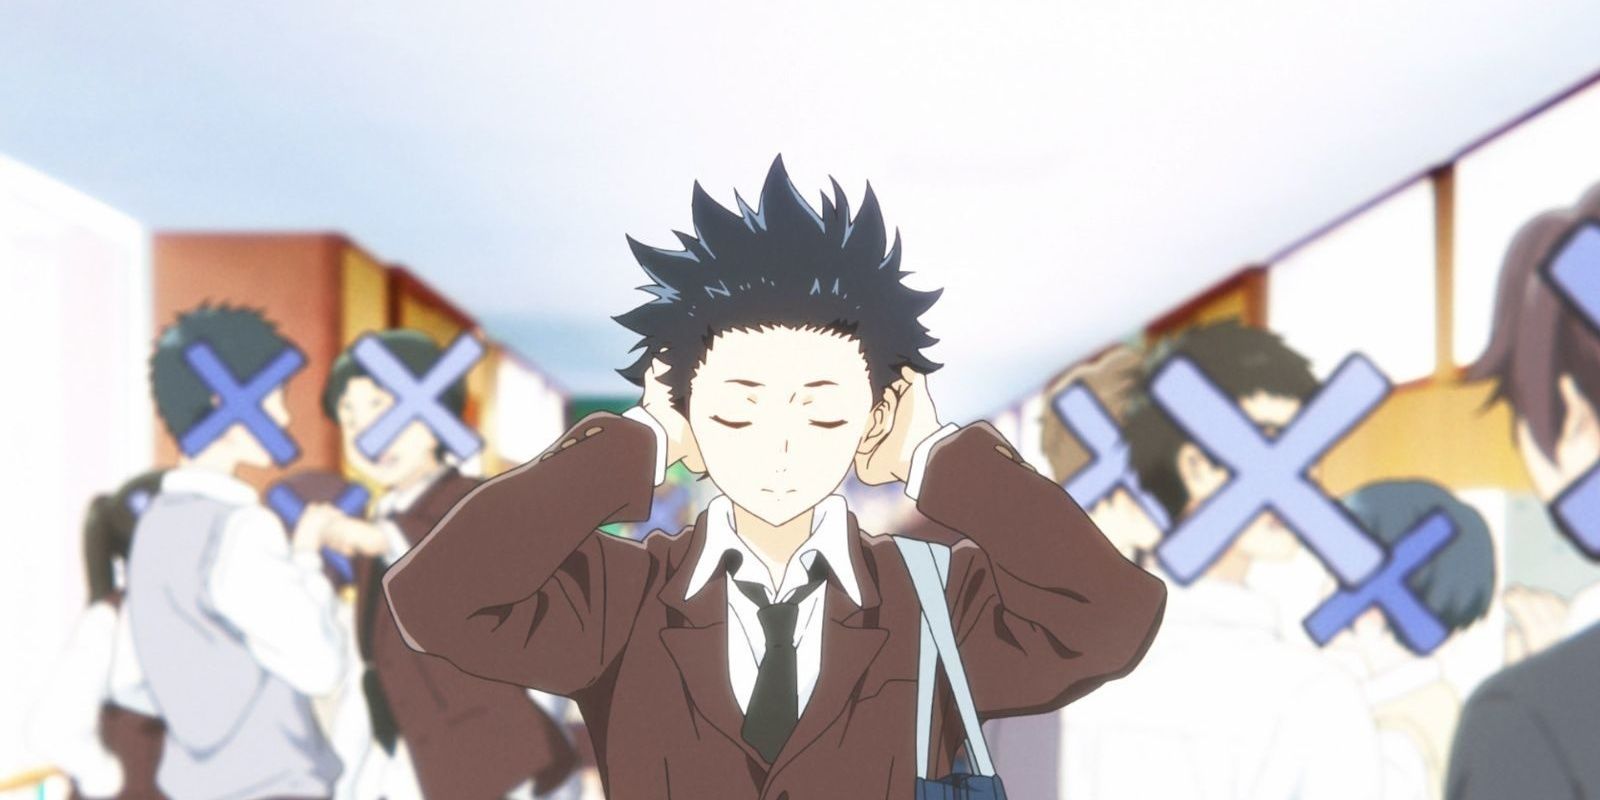 An antisocial former bully blocks out others in A Silent Voice